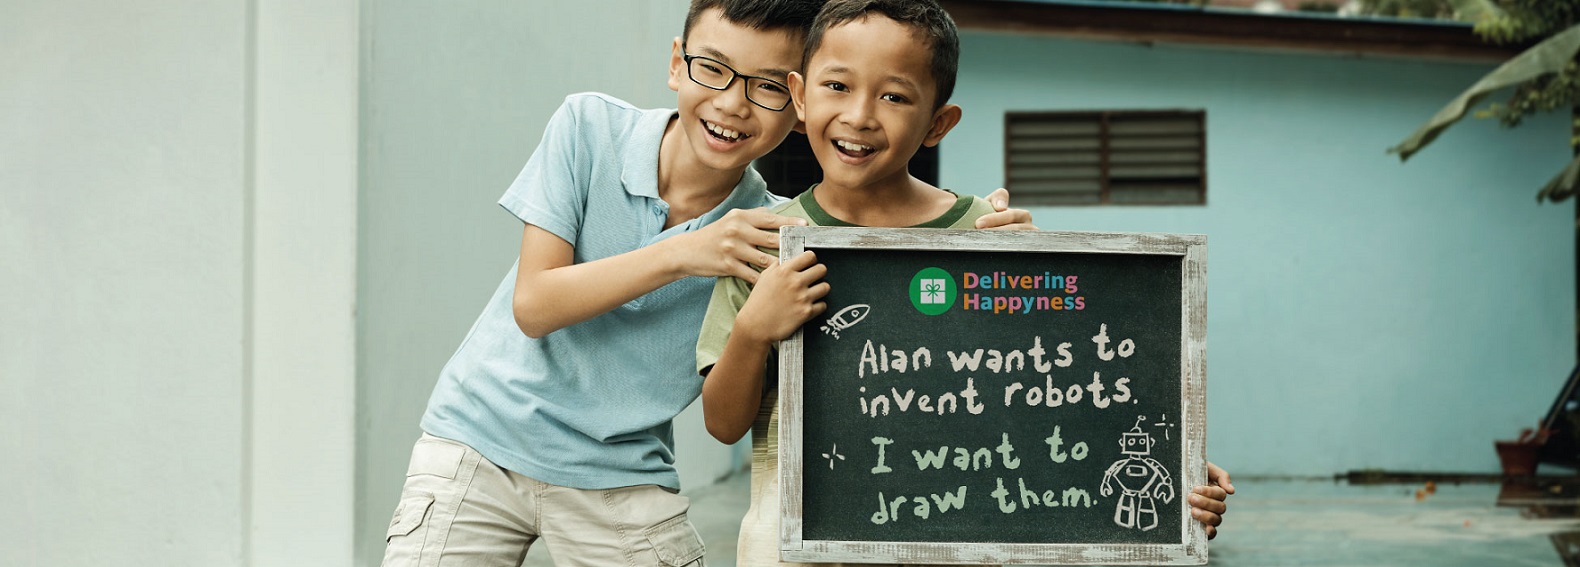 Join Grab to ‘Deliver Happyness’ to 7,000 underprivileged kids